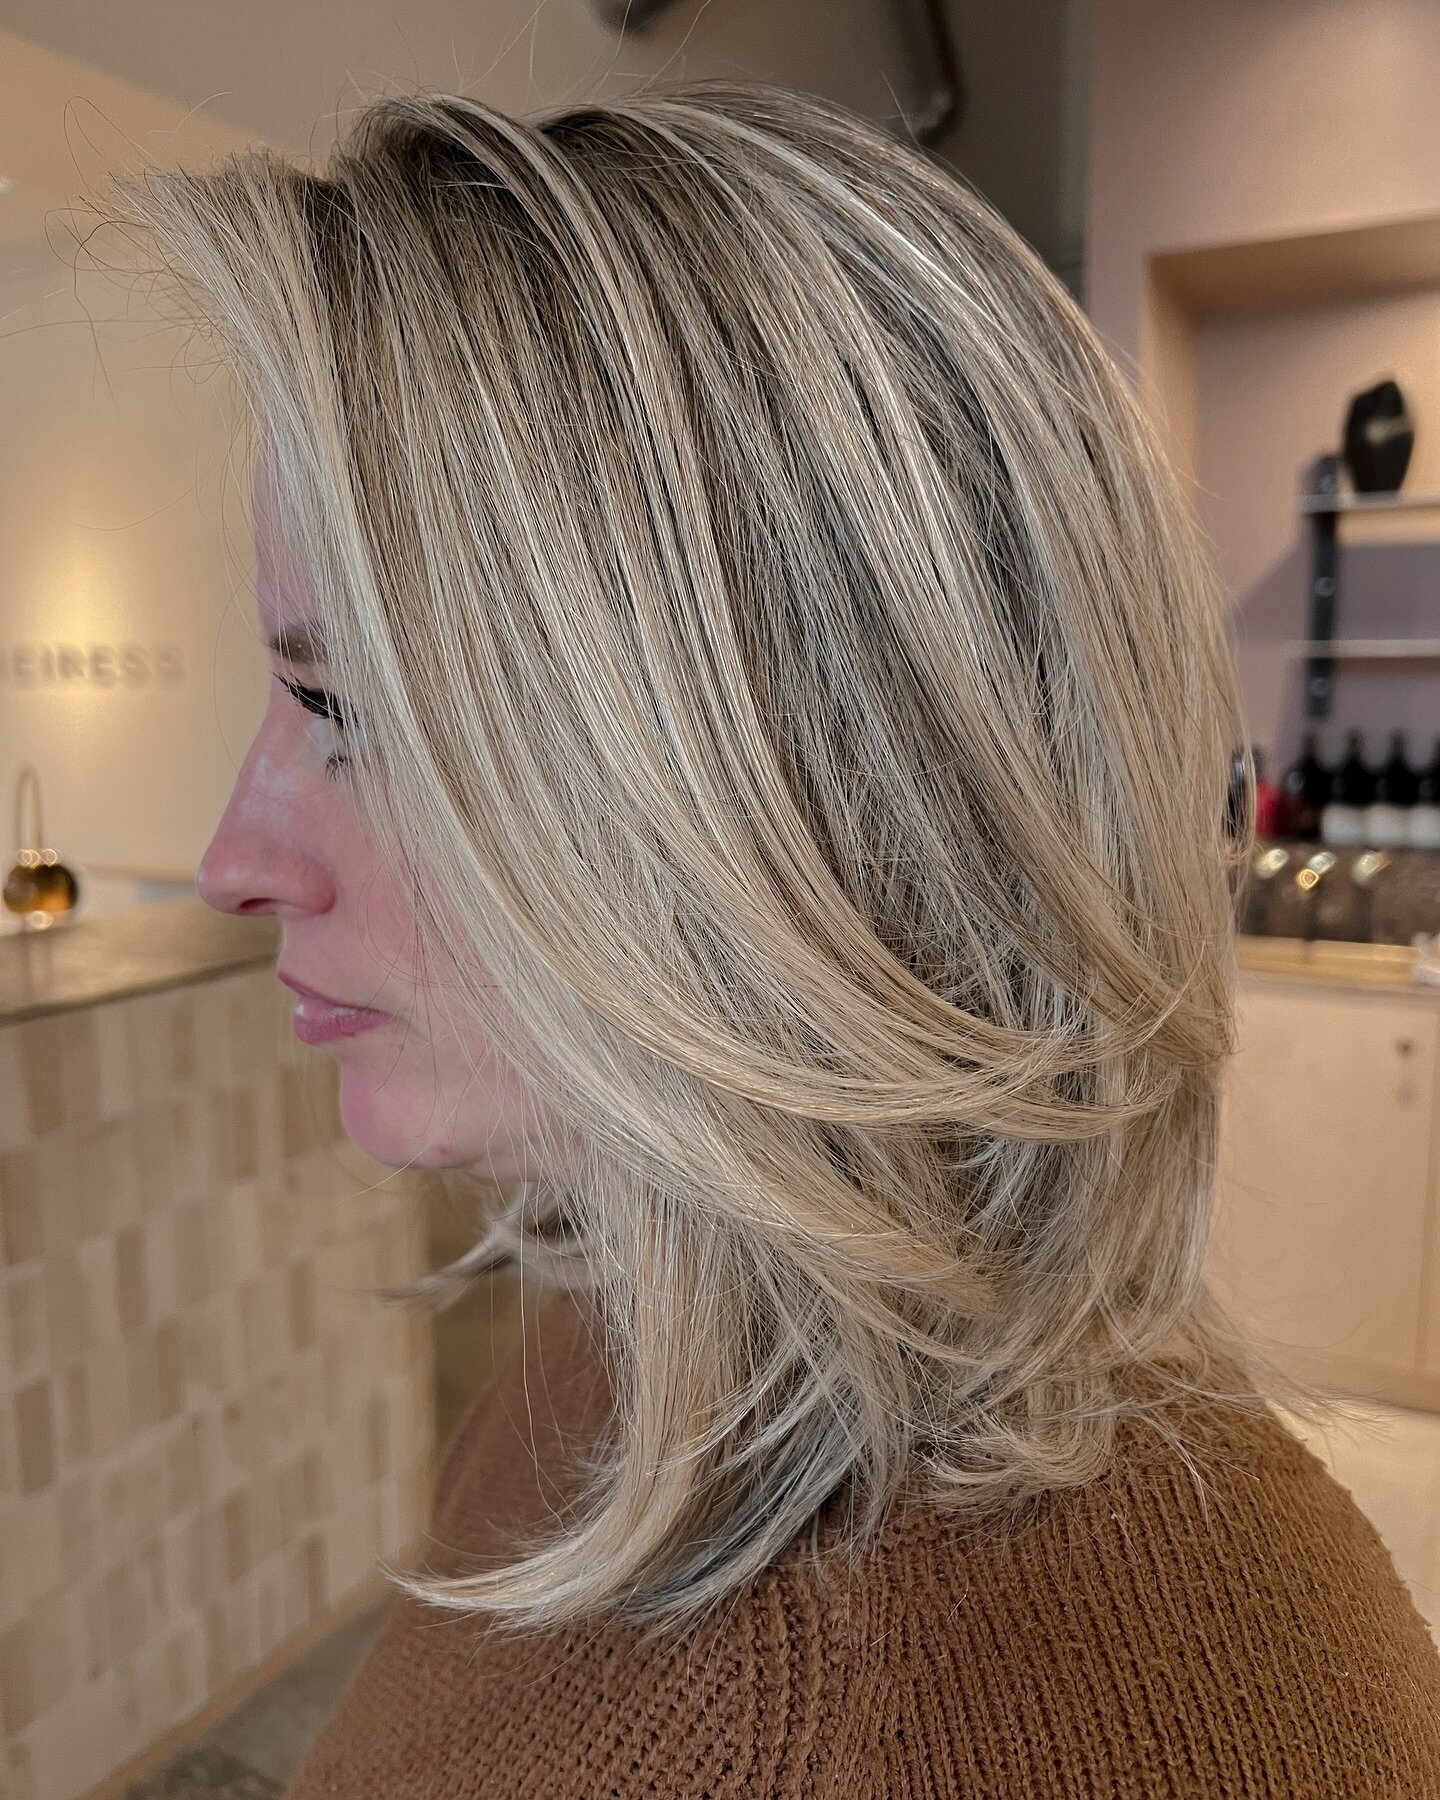 When it comes to hair, both long and short styles have their own unique beauty. However, if you&rsquo;re looking to elevate your look with minimal effort the new &ldquo;Rachel&rdquo; is making a cool new comeback. 

@igotlashed1